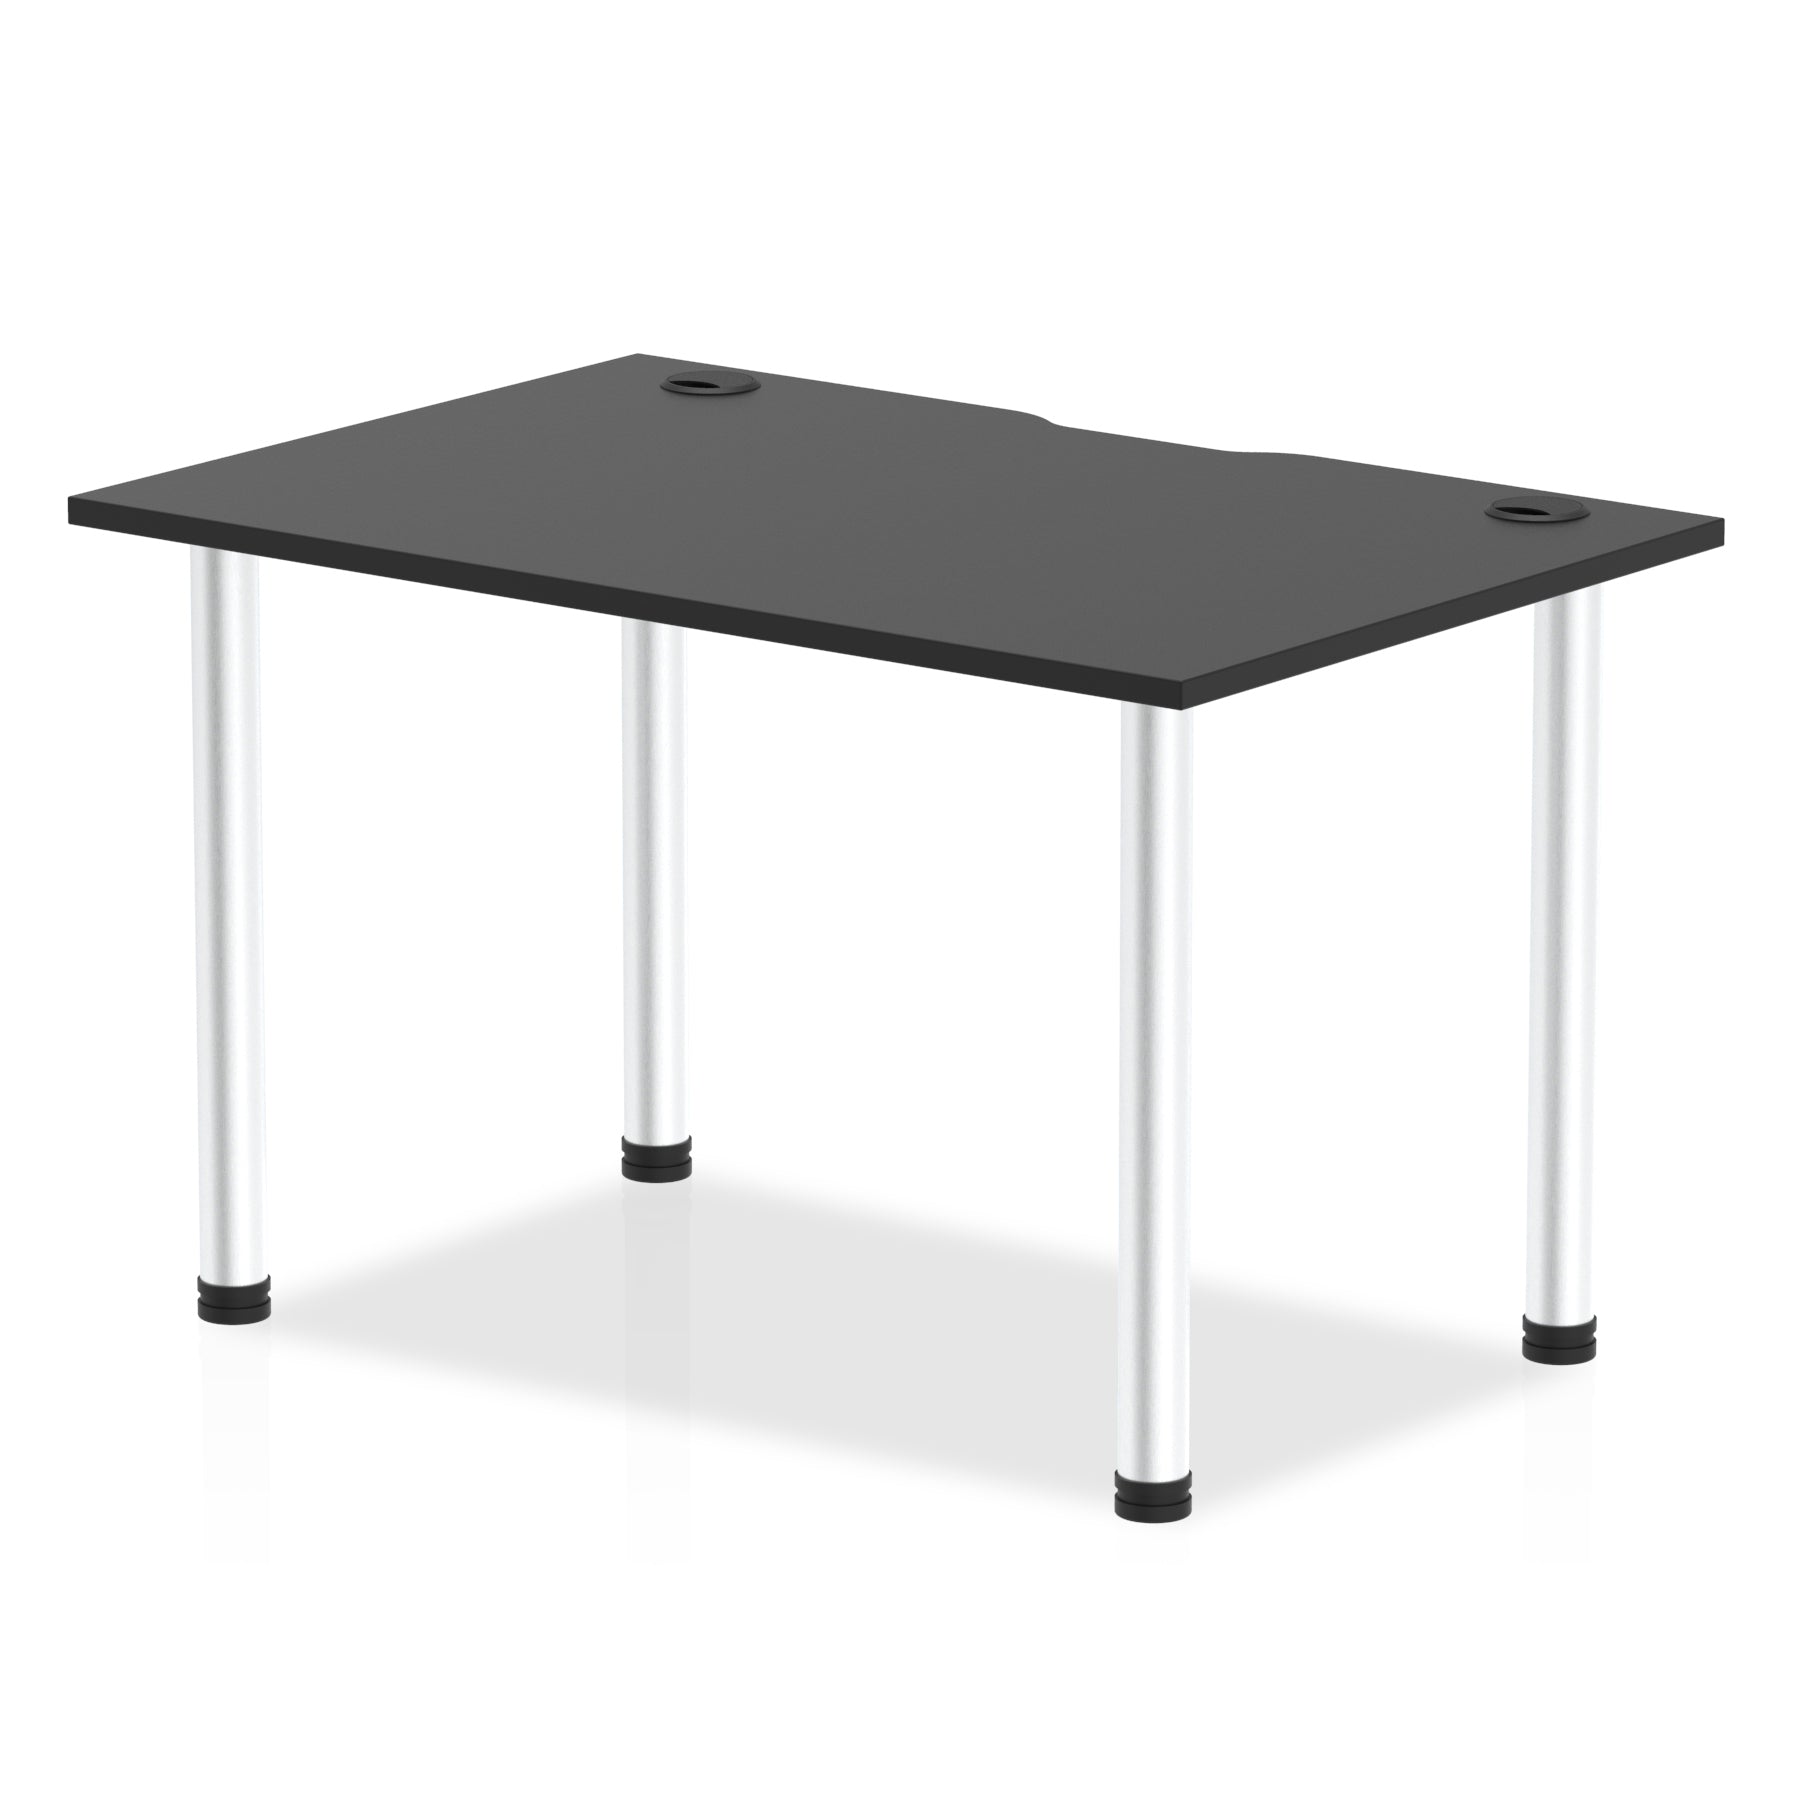 Photos - Dining Table Dynamic Office Solutions Impulse Black Series Straight Table I004216 